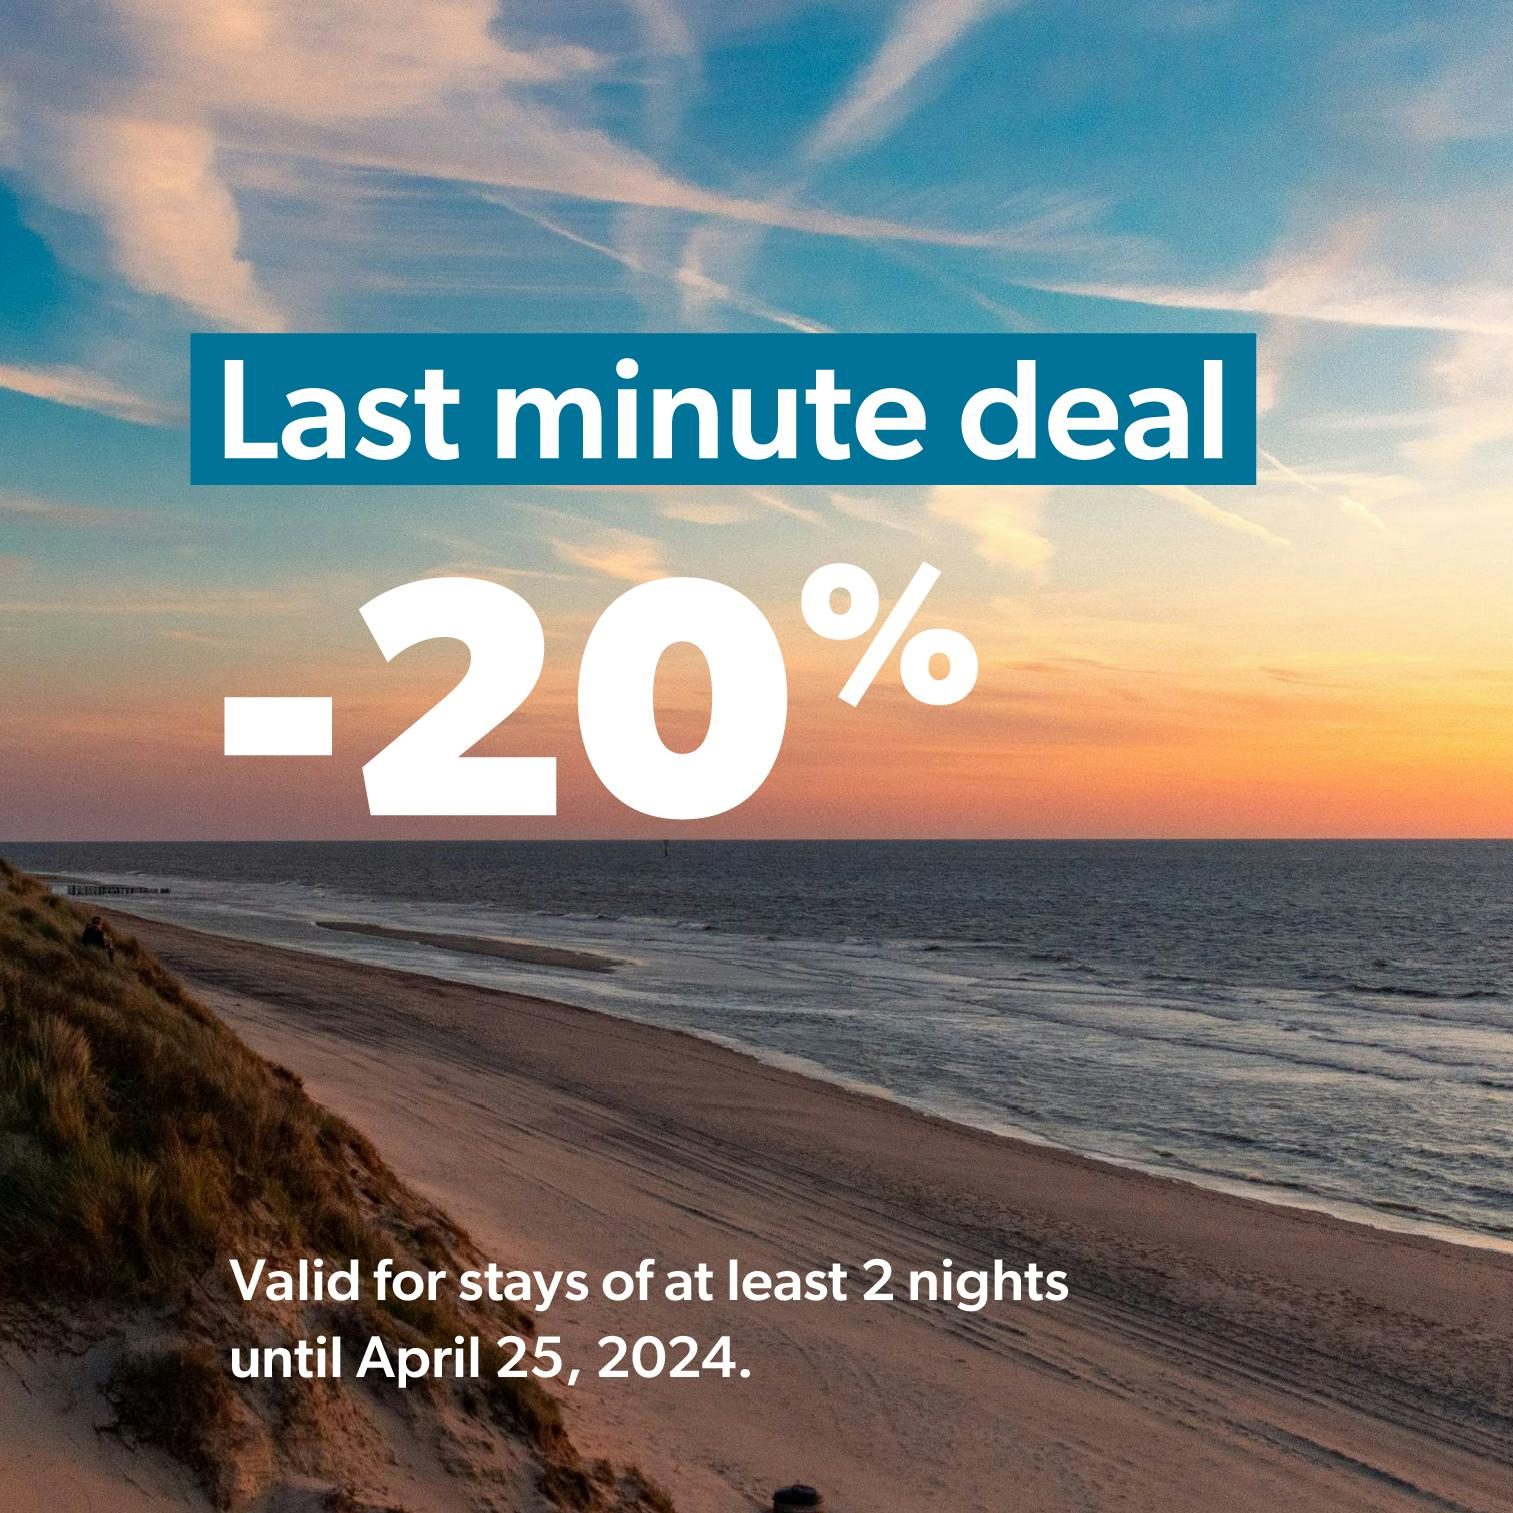 Last minute deal: 20% discount for stays of at least 2 nights, valid until April 30, 2024.